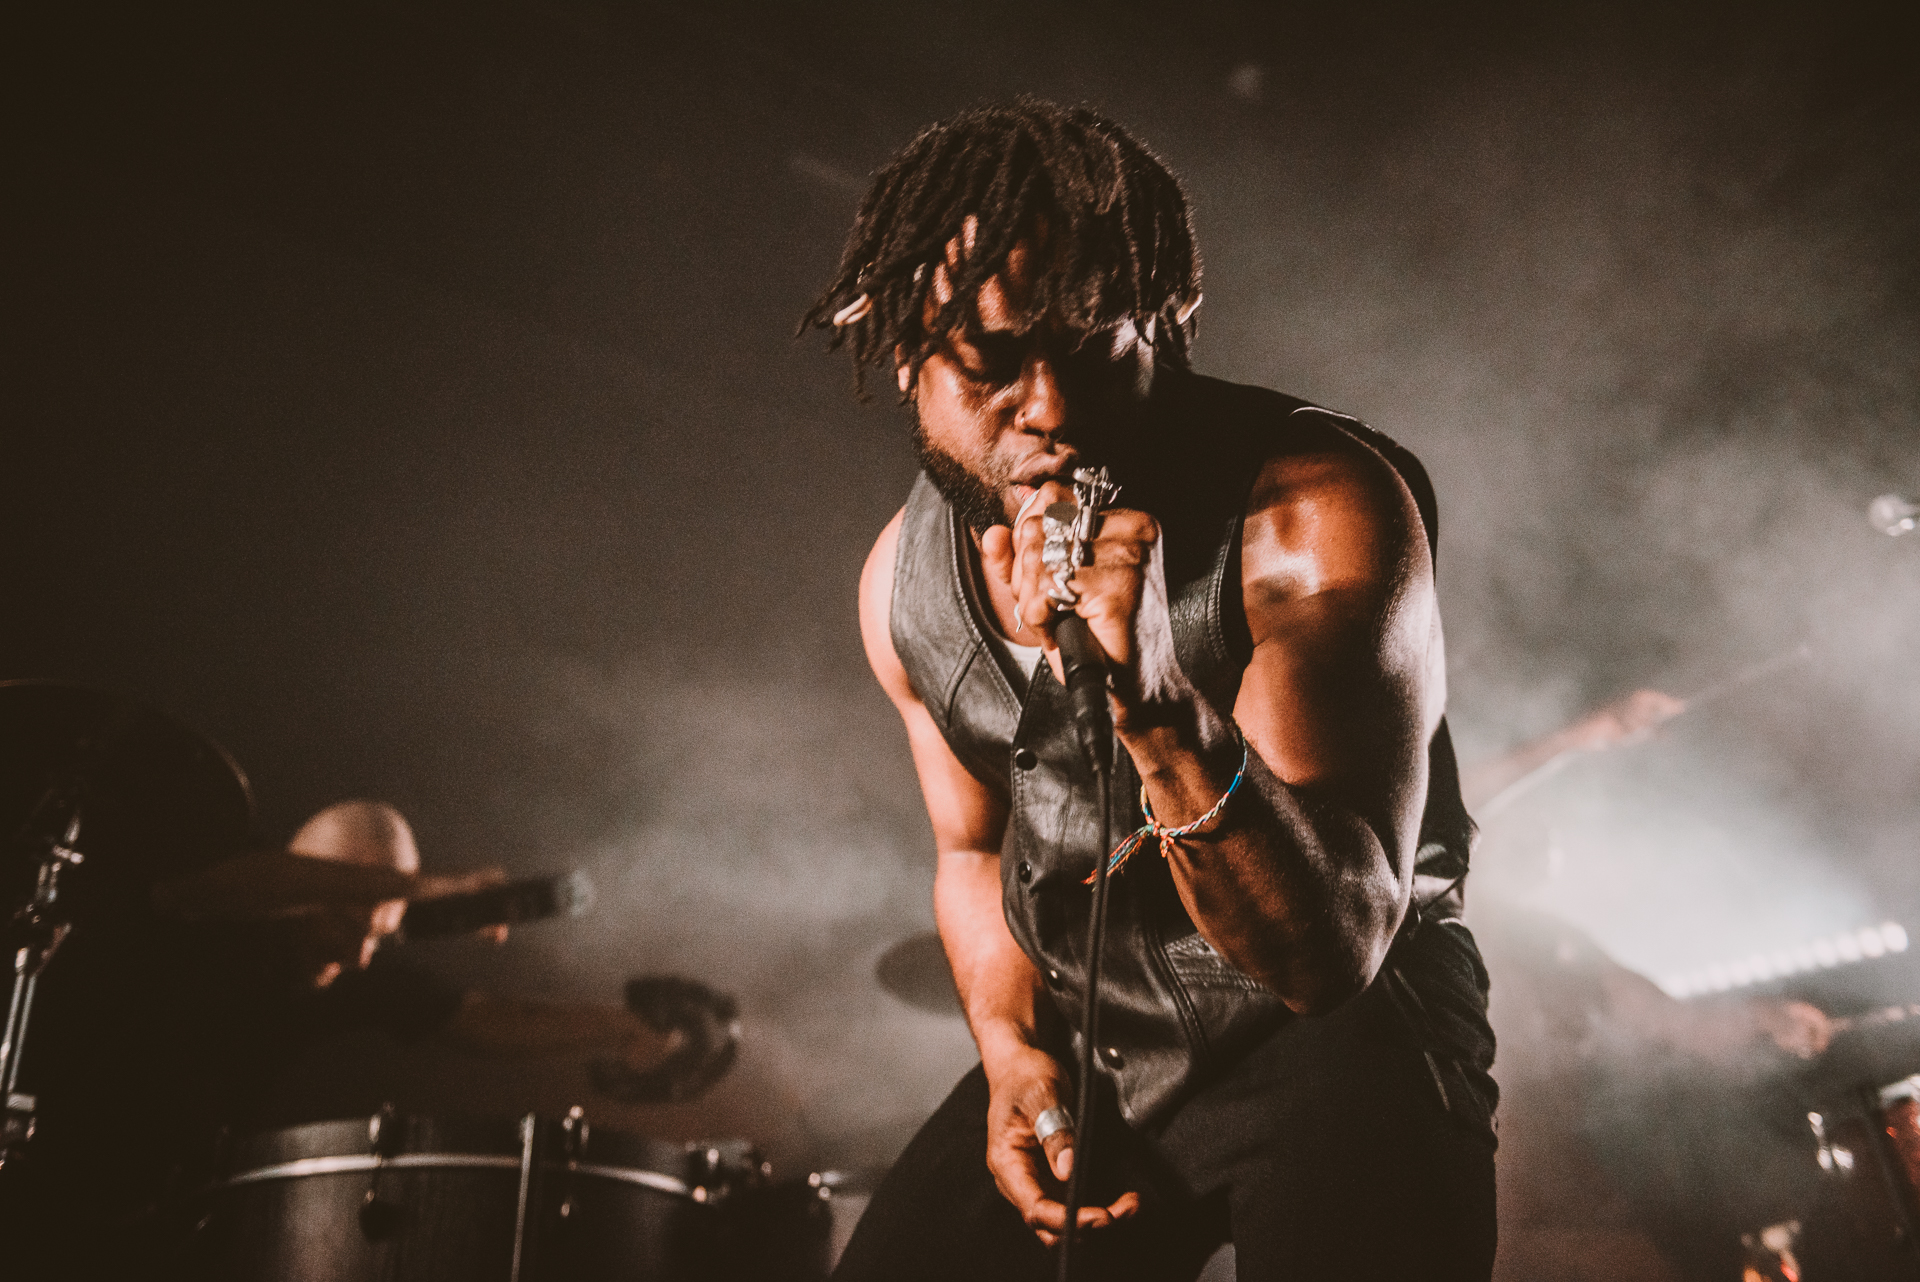 1_Young_Fathers-VENUE-Timothy_Nguyen-20181117 (16 of 23).jpg